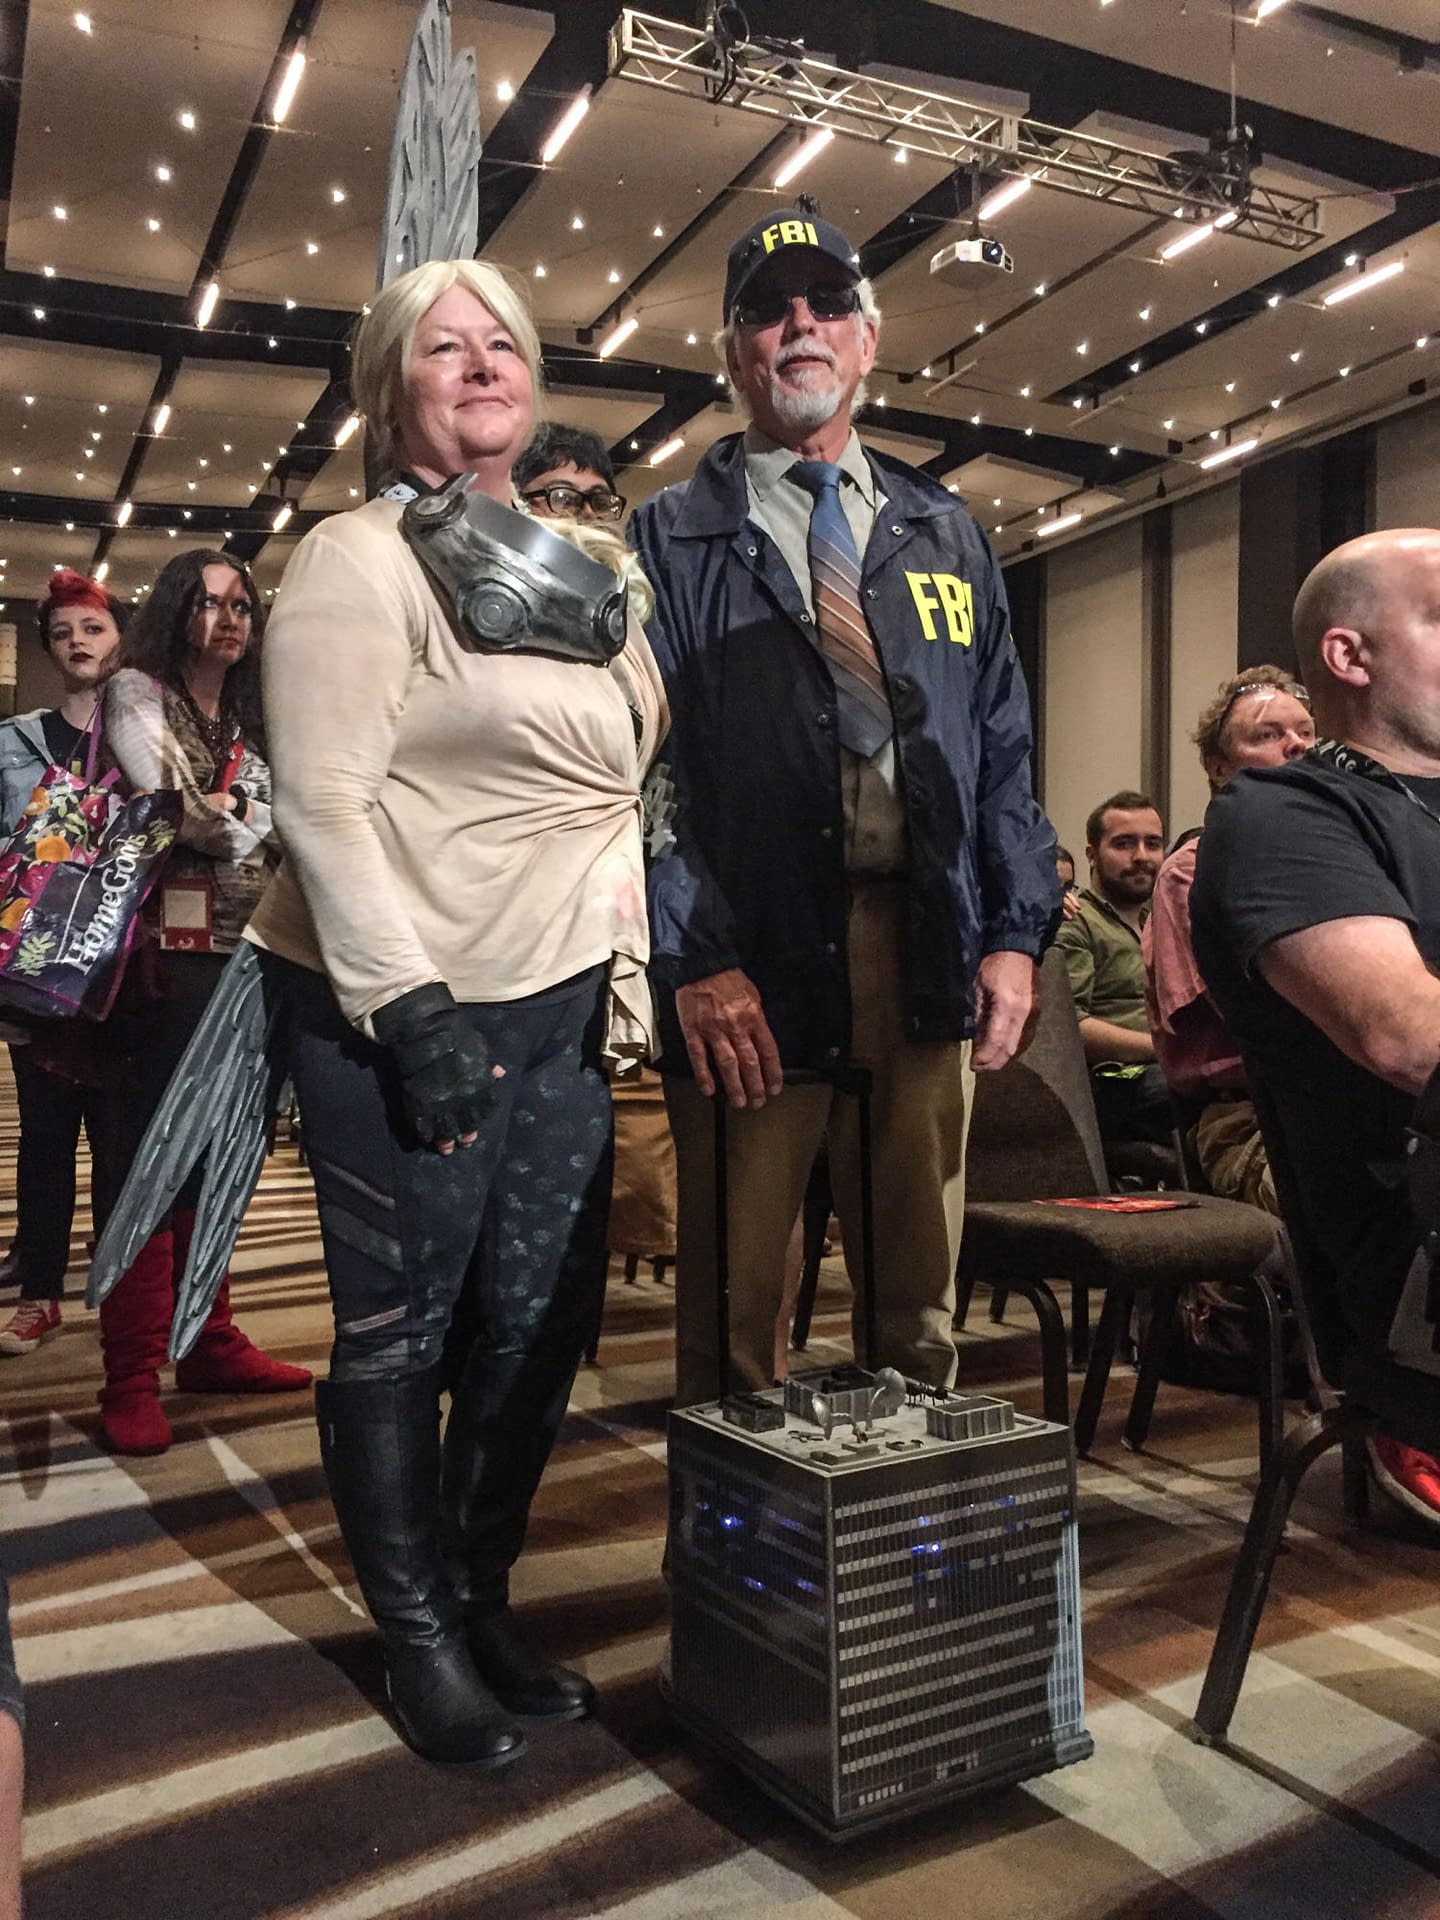 Pym, van Dyne Family Reunion with Evangeline Lilly at Dragon Con